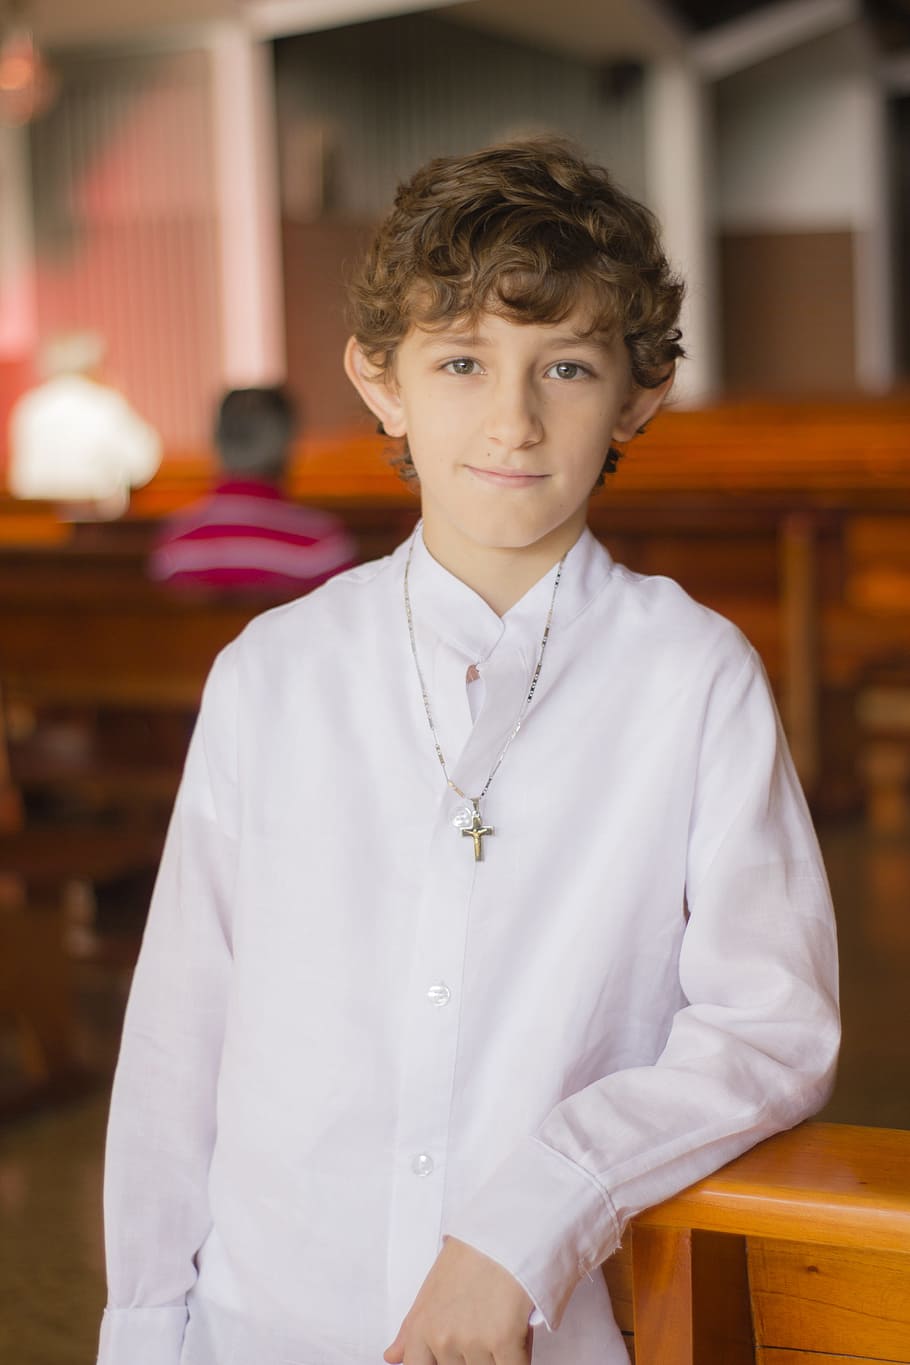 altar boy, church, catholic, portrait, child, boys, looking at camera, one person, front view, waist up